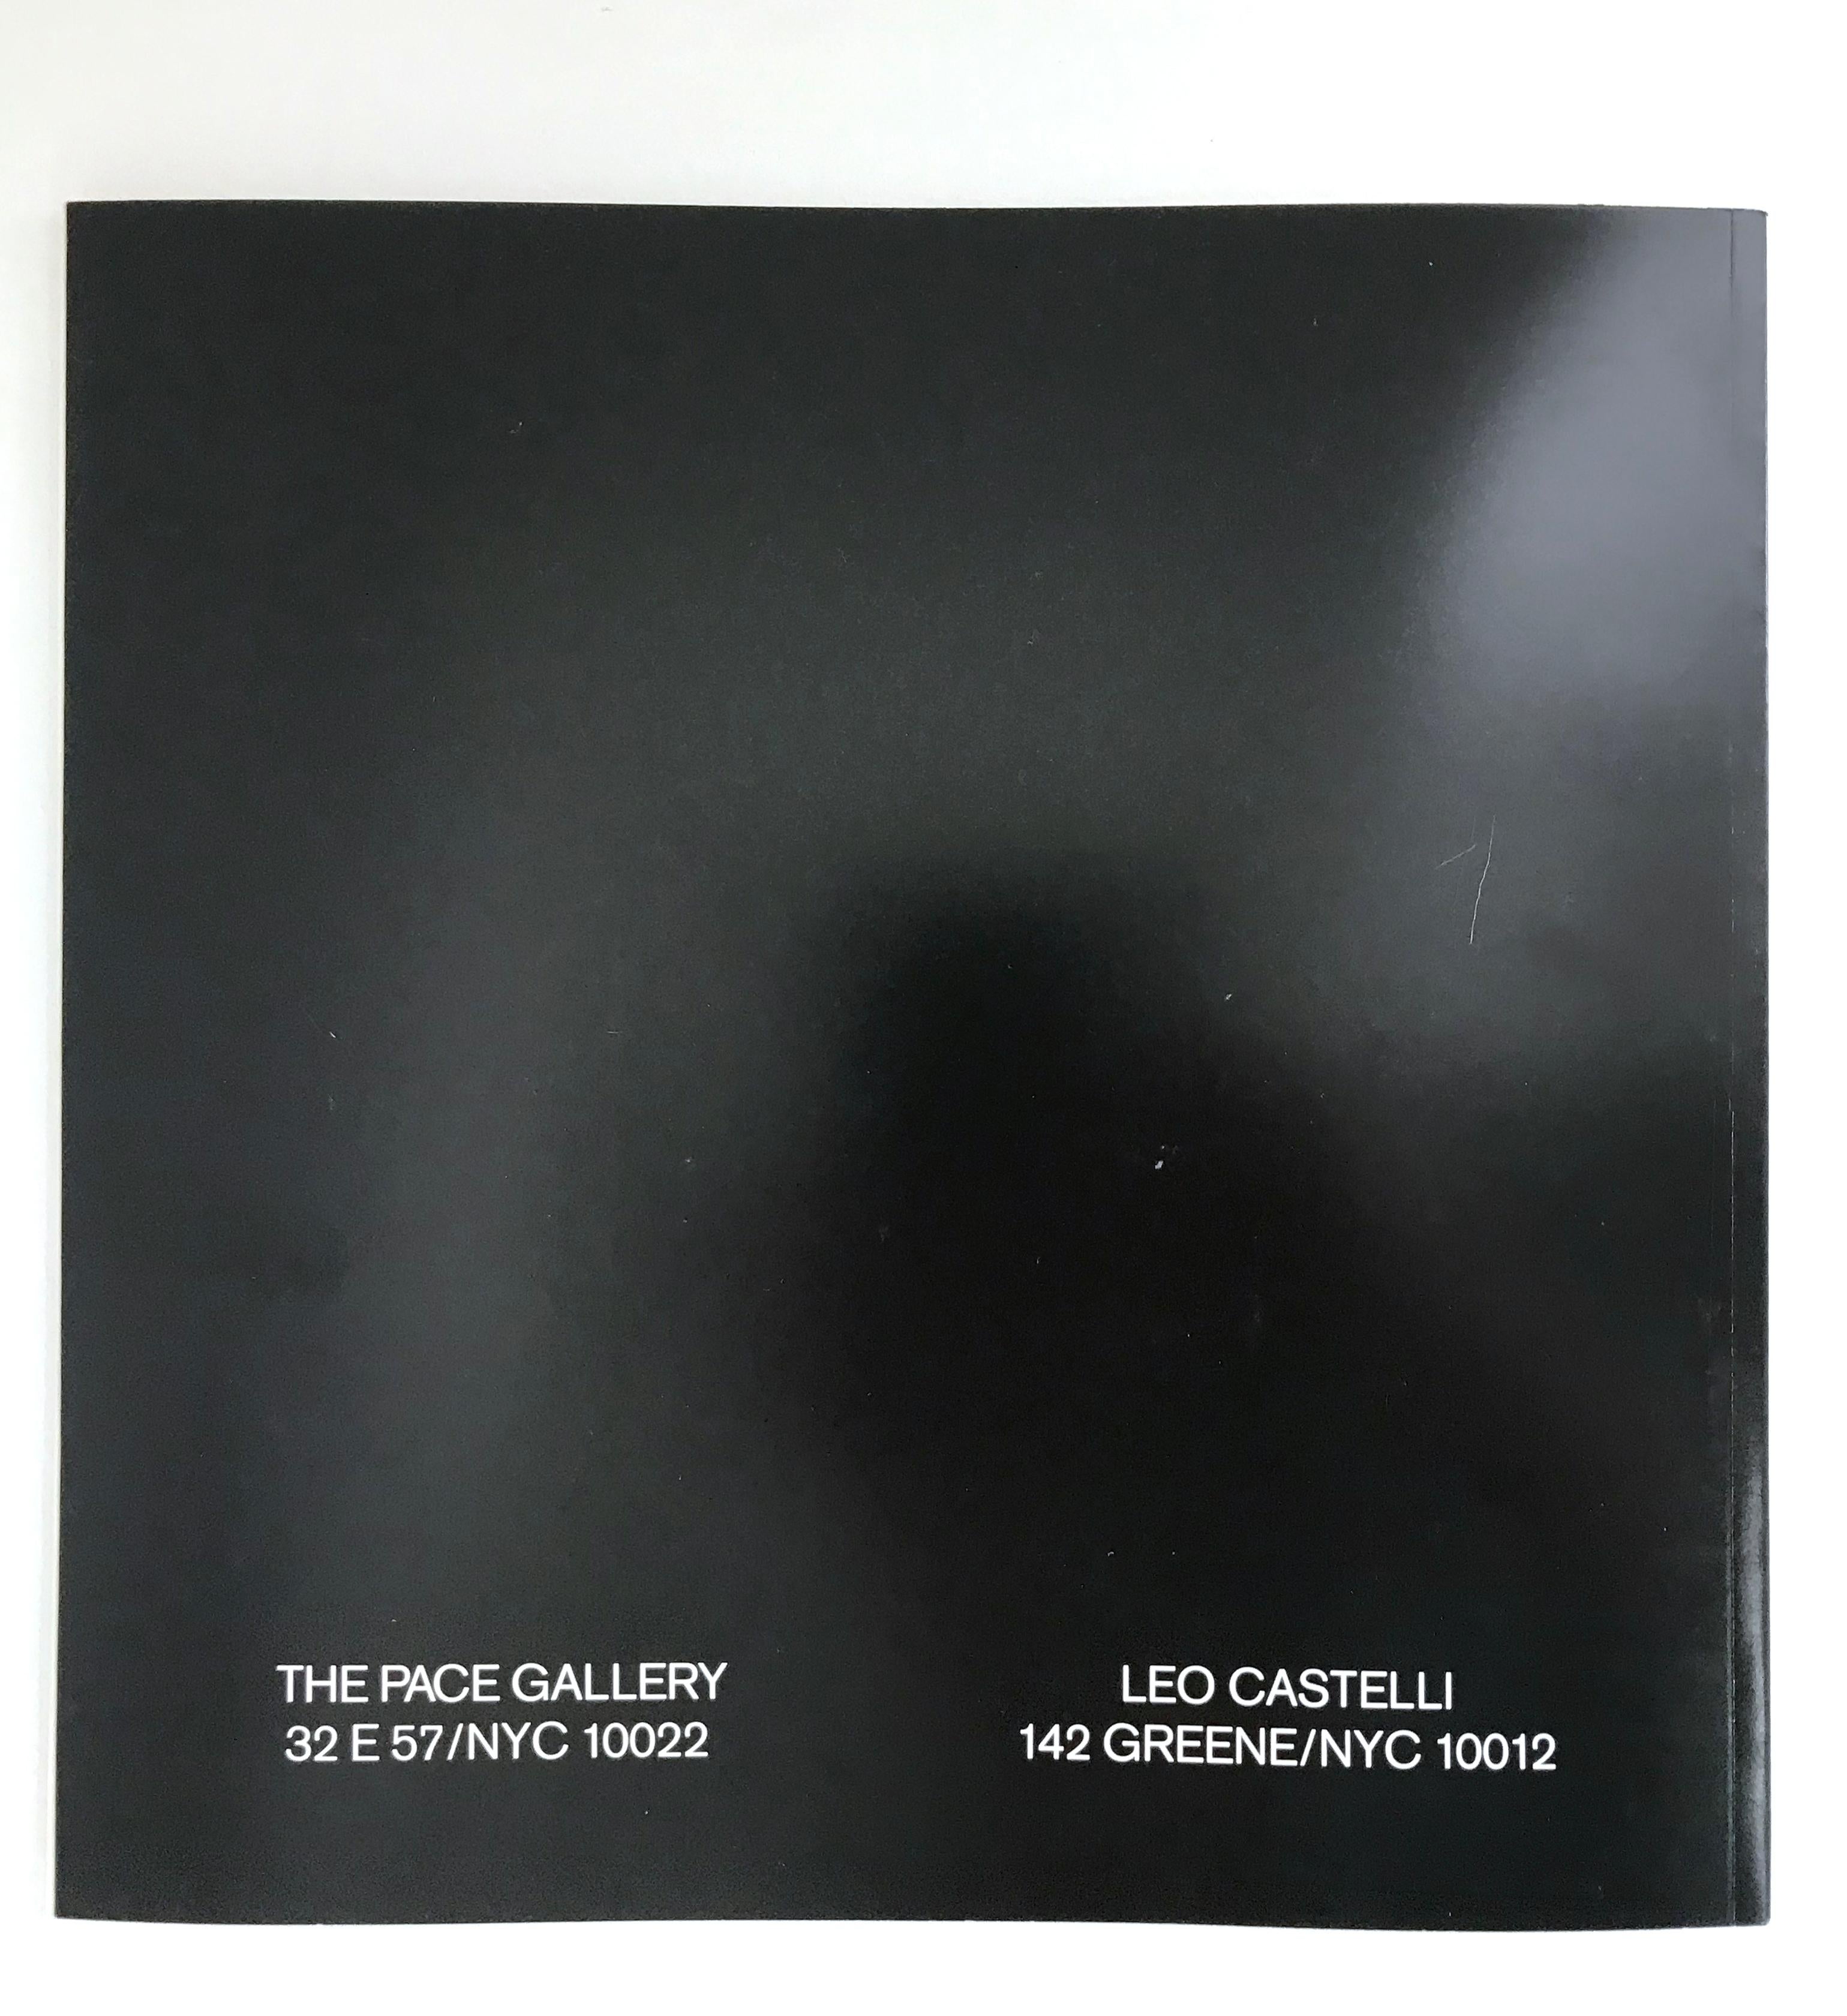 Richard Serra
Sculpture 1985–1987
1987
Description
Published by Leo Castelli and The Pace Gallery
10 1/2 x 10 1/2 inches
50 pages
51 black and white illustrations

Published on the occasion of the exhibition at Leo Castelli and Pace, New York,